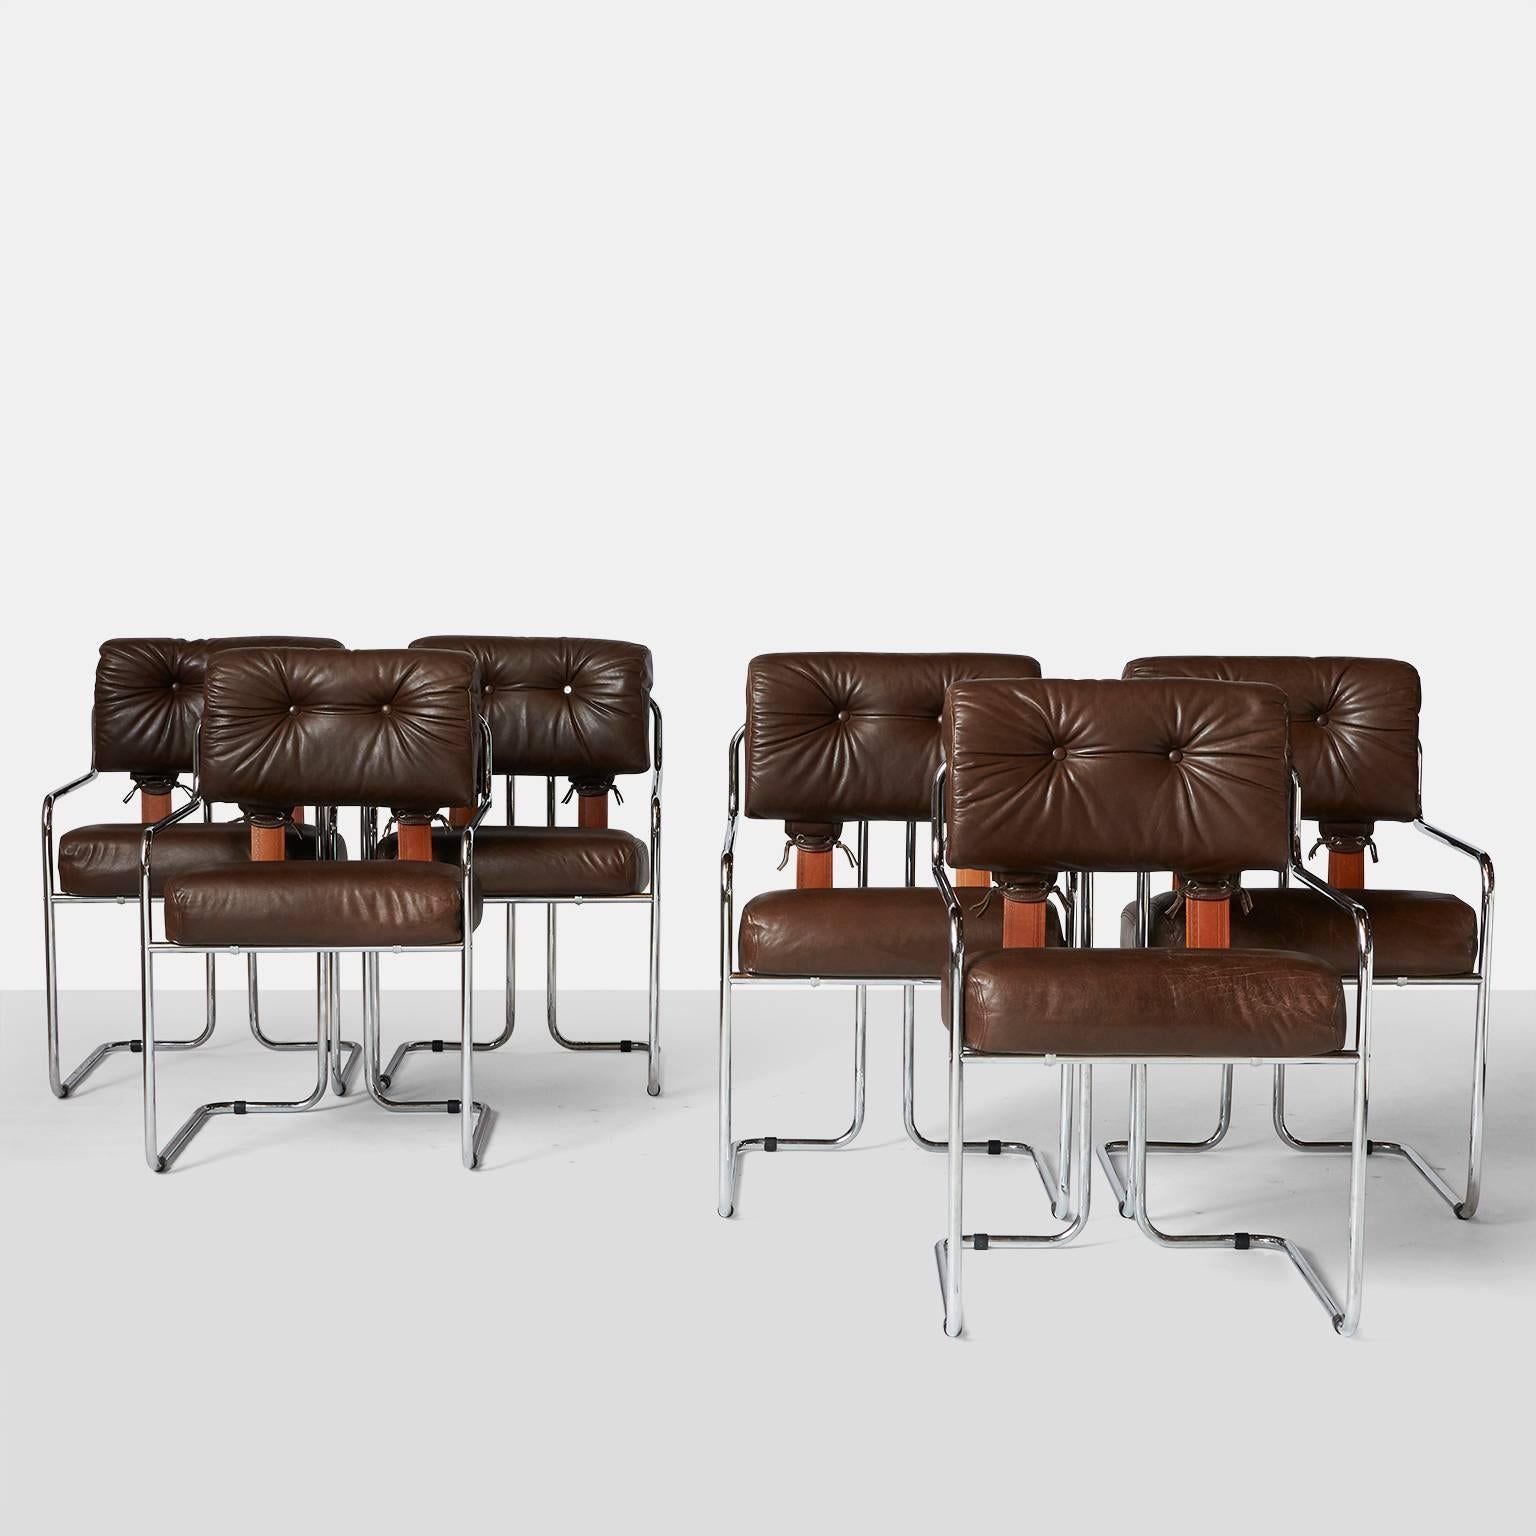 A set of six chrome framed chairs with deep brown soft leather cushions. The chairs were designed by Guido Faleschini in 1975 for the Pace Collection.
Provenance: The Estate of Nancy Buncher.

 